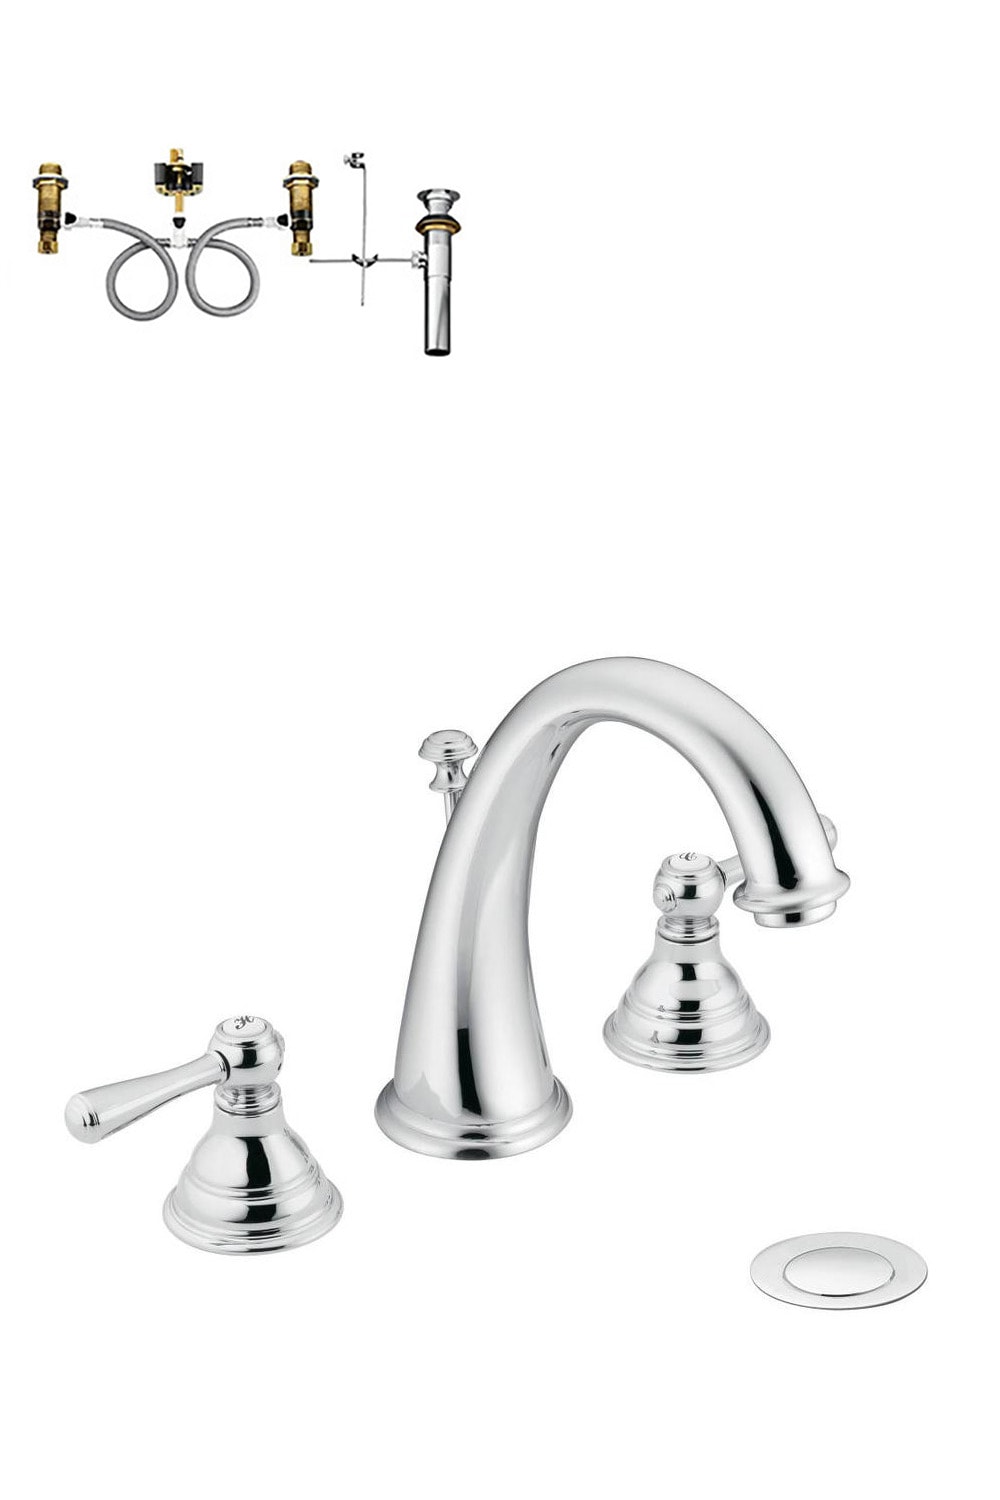 Kingsley Polished Chrome Widespread 2-handle WaterSense Bathroom Sink Faucet with Drain | - Moen T6125-9000-L